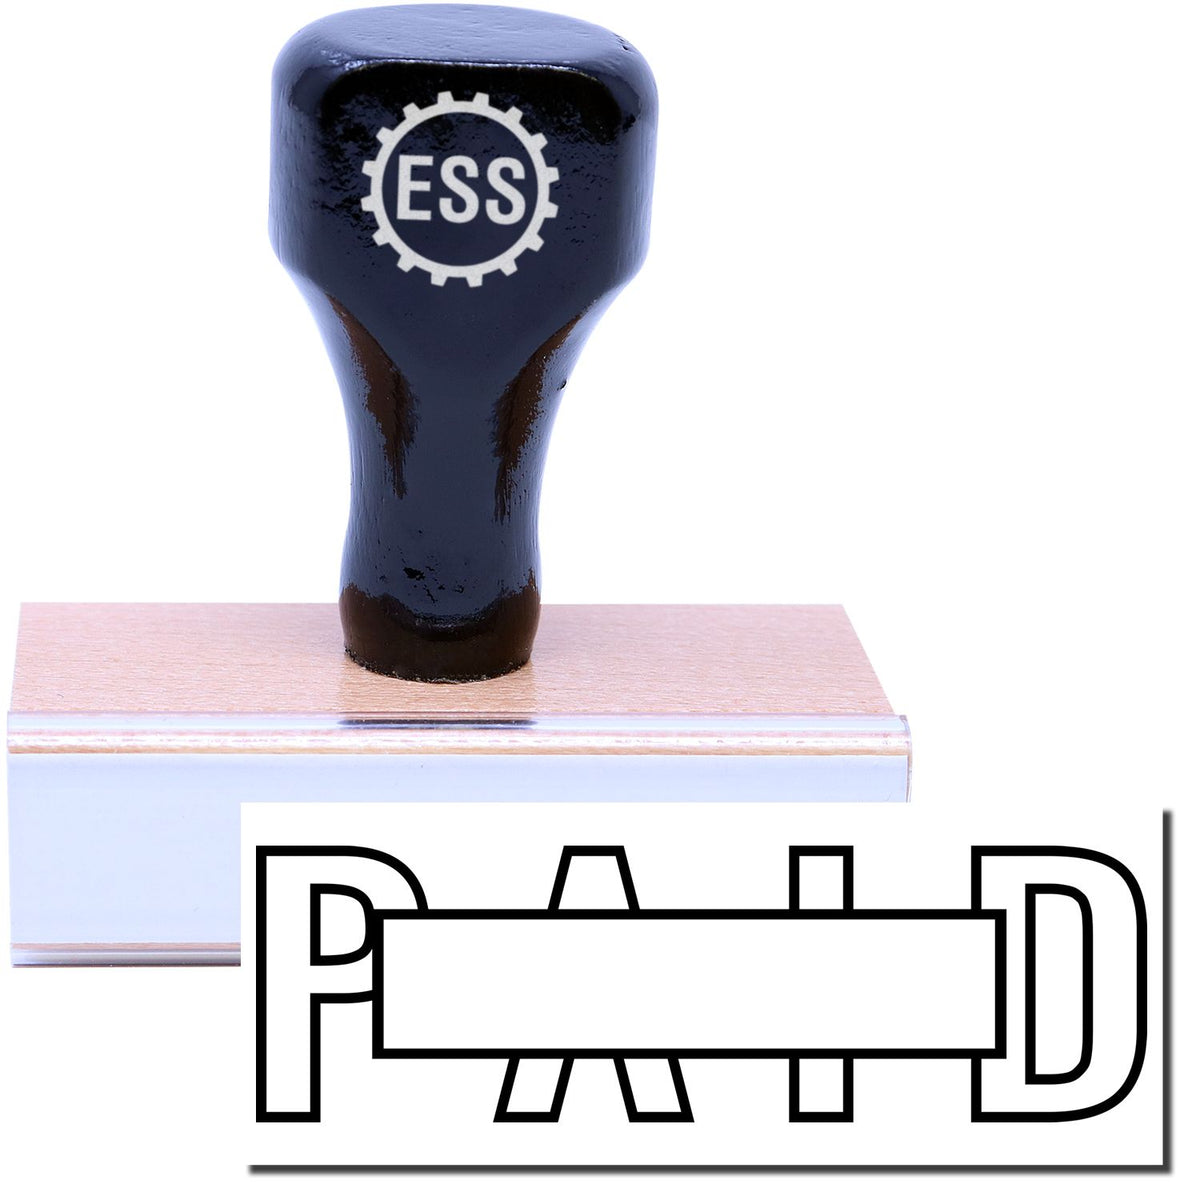 A stock office rubber stamp with a stamped image showing how the text &quot;PAID&quot; in a large outline font with a box is displayed after stamping.